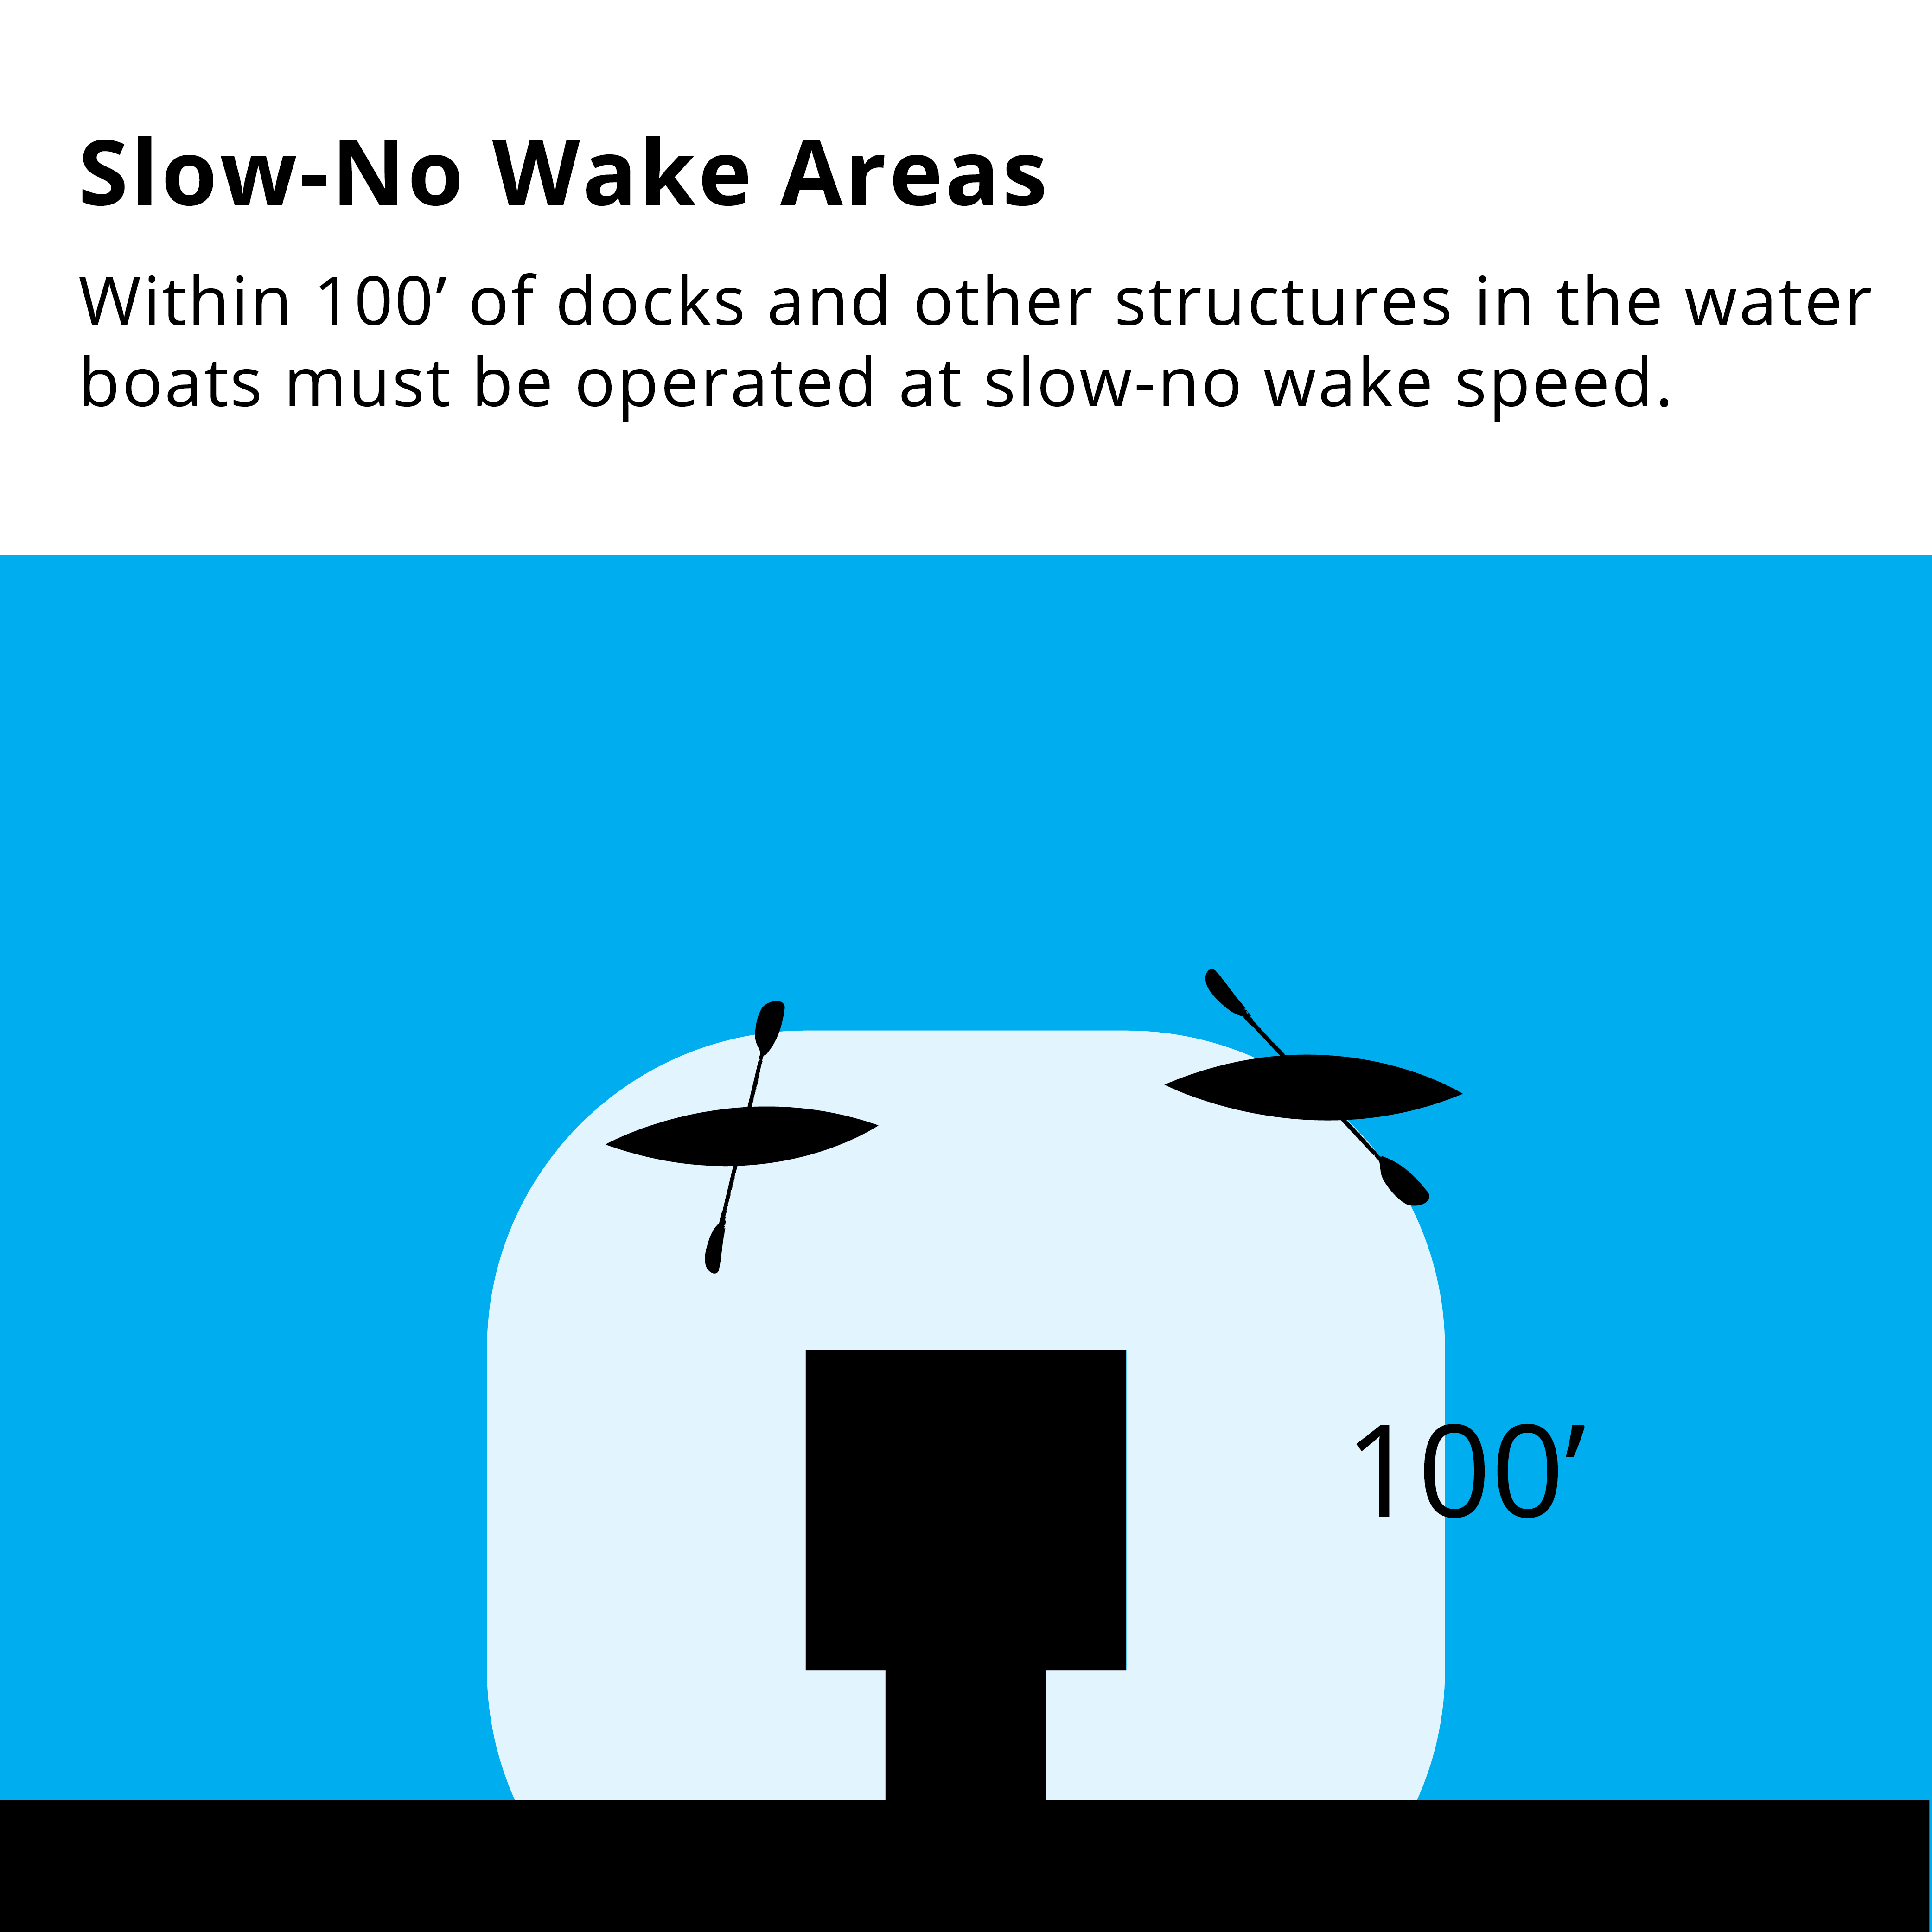 Boaters must follow slow-no wake rules within 100 feet of docks and other structures